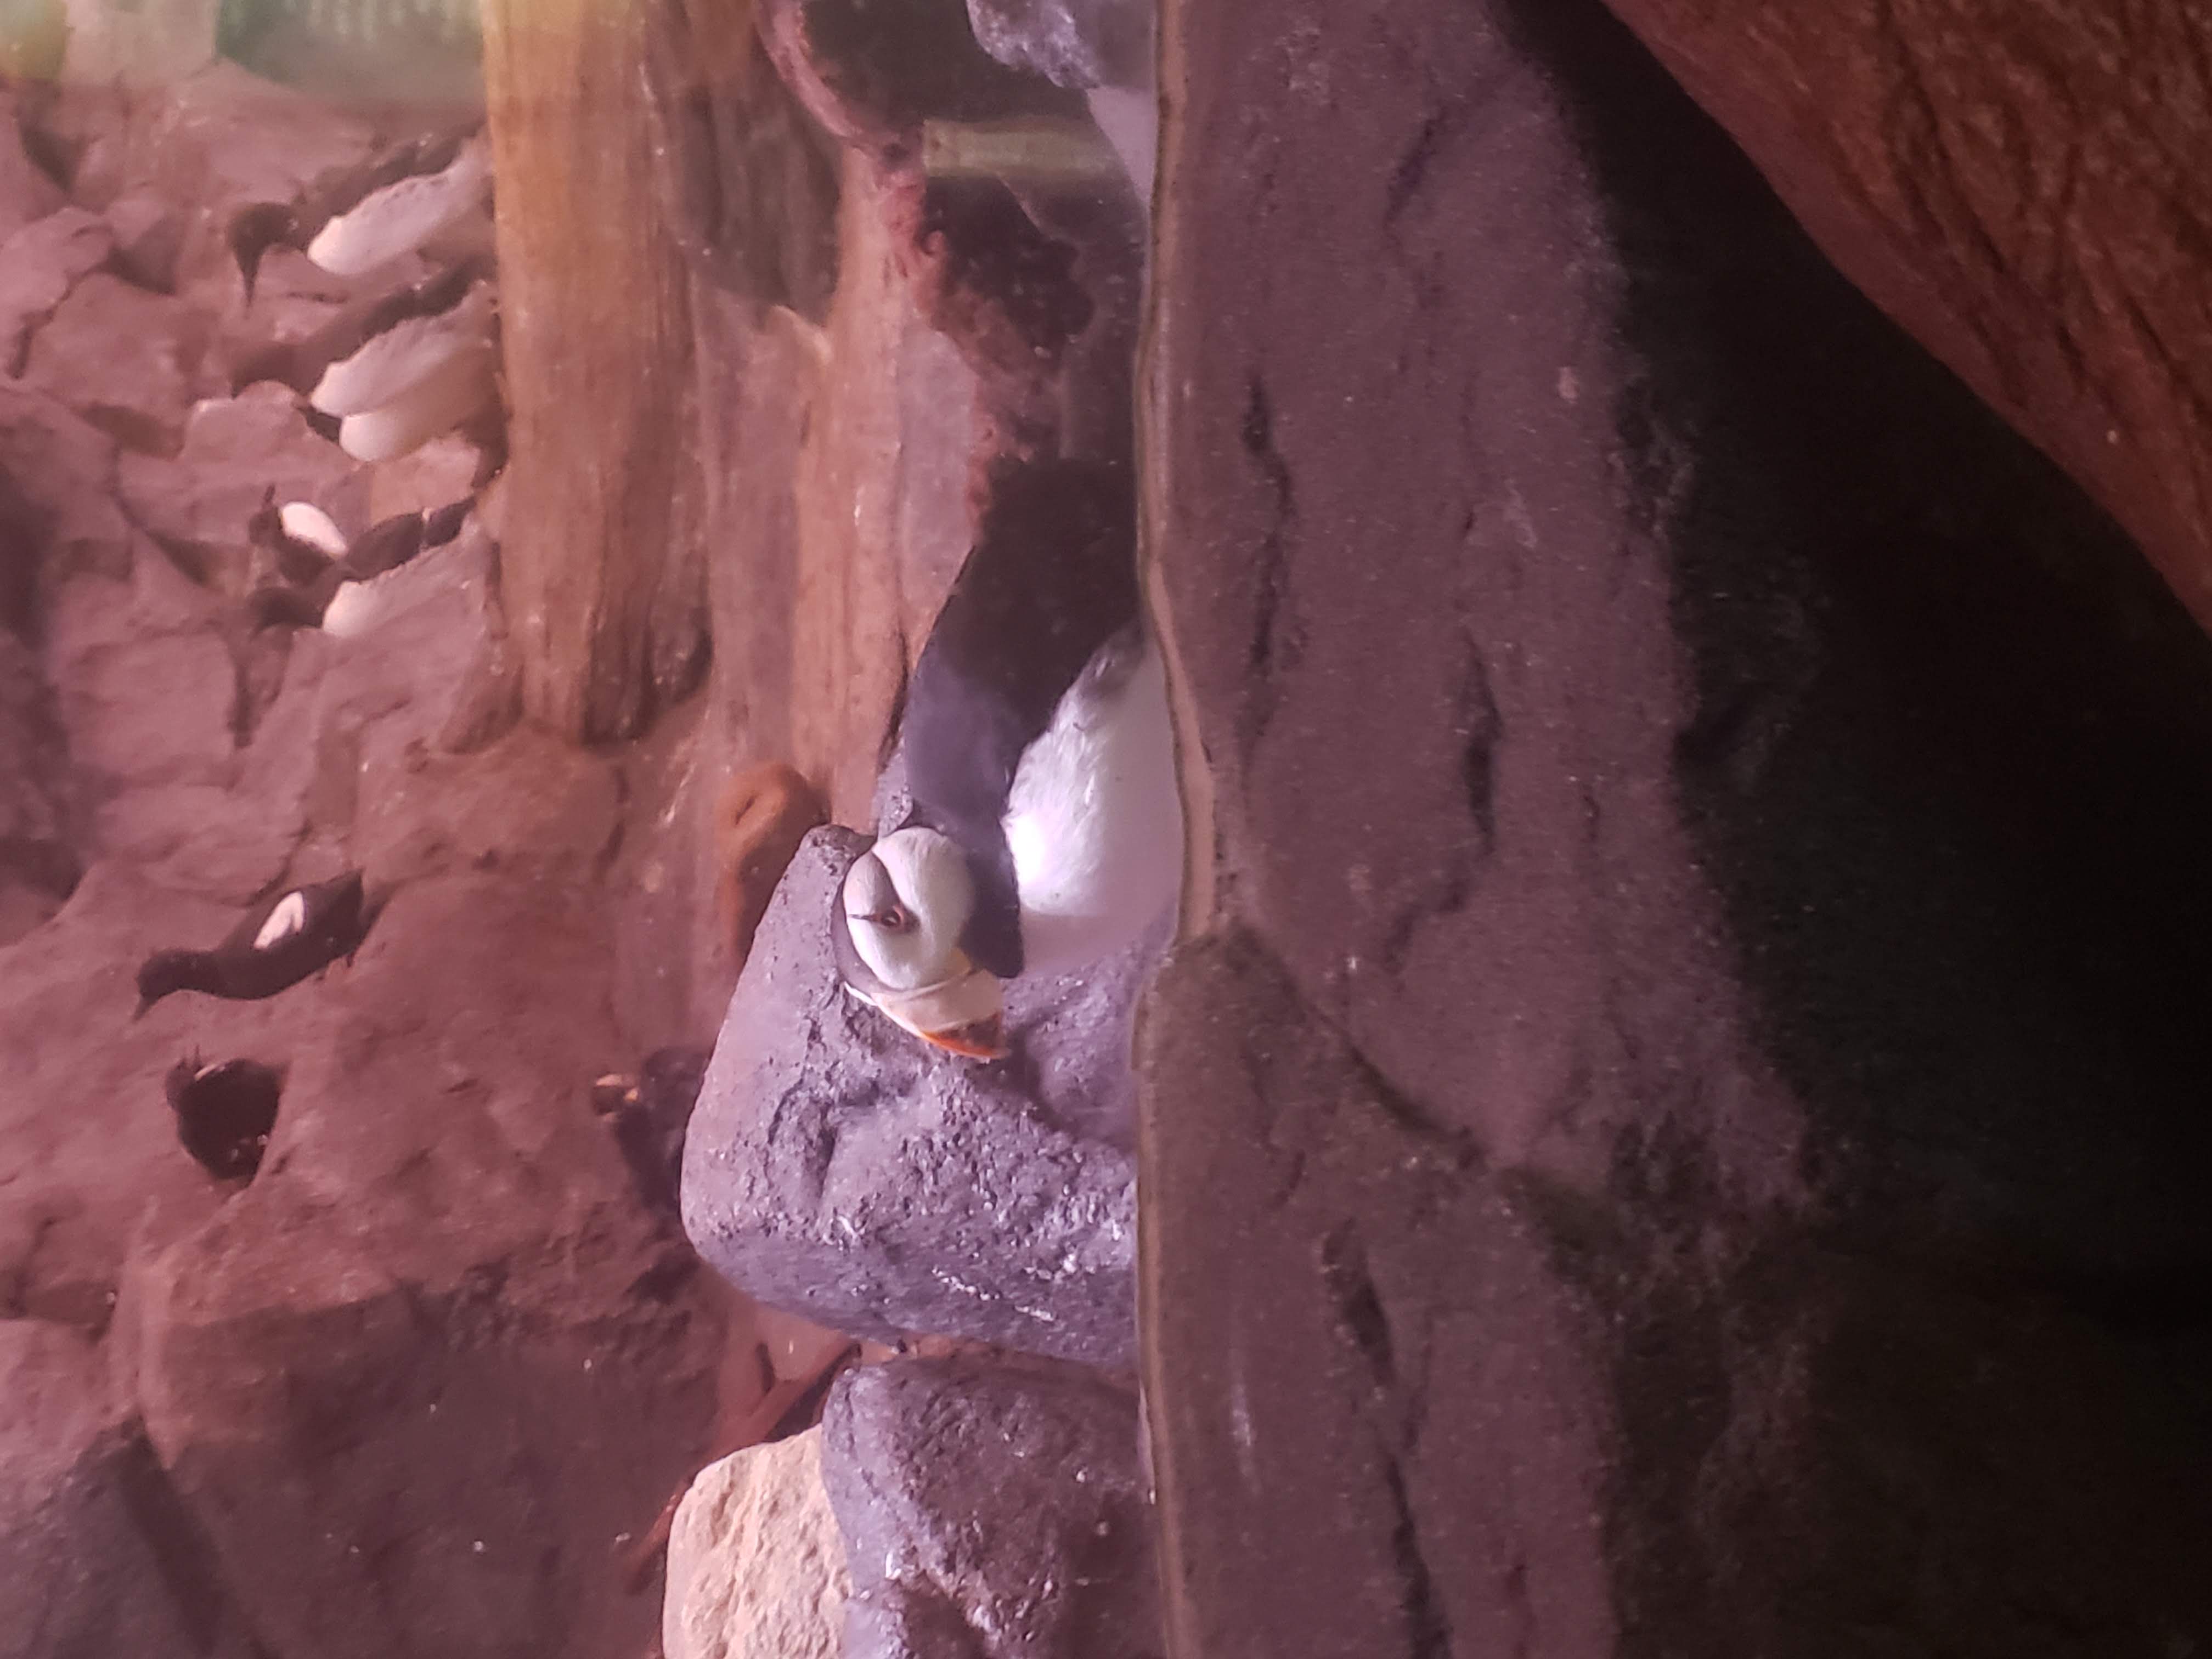 Puffins sitting on a rock